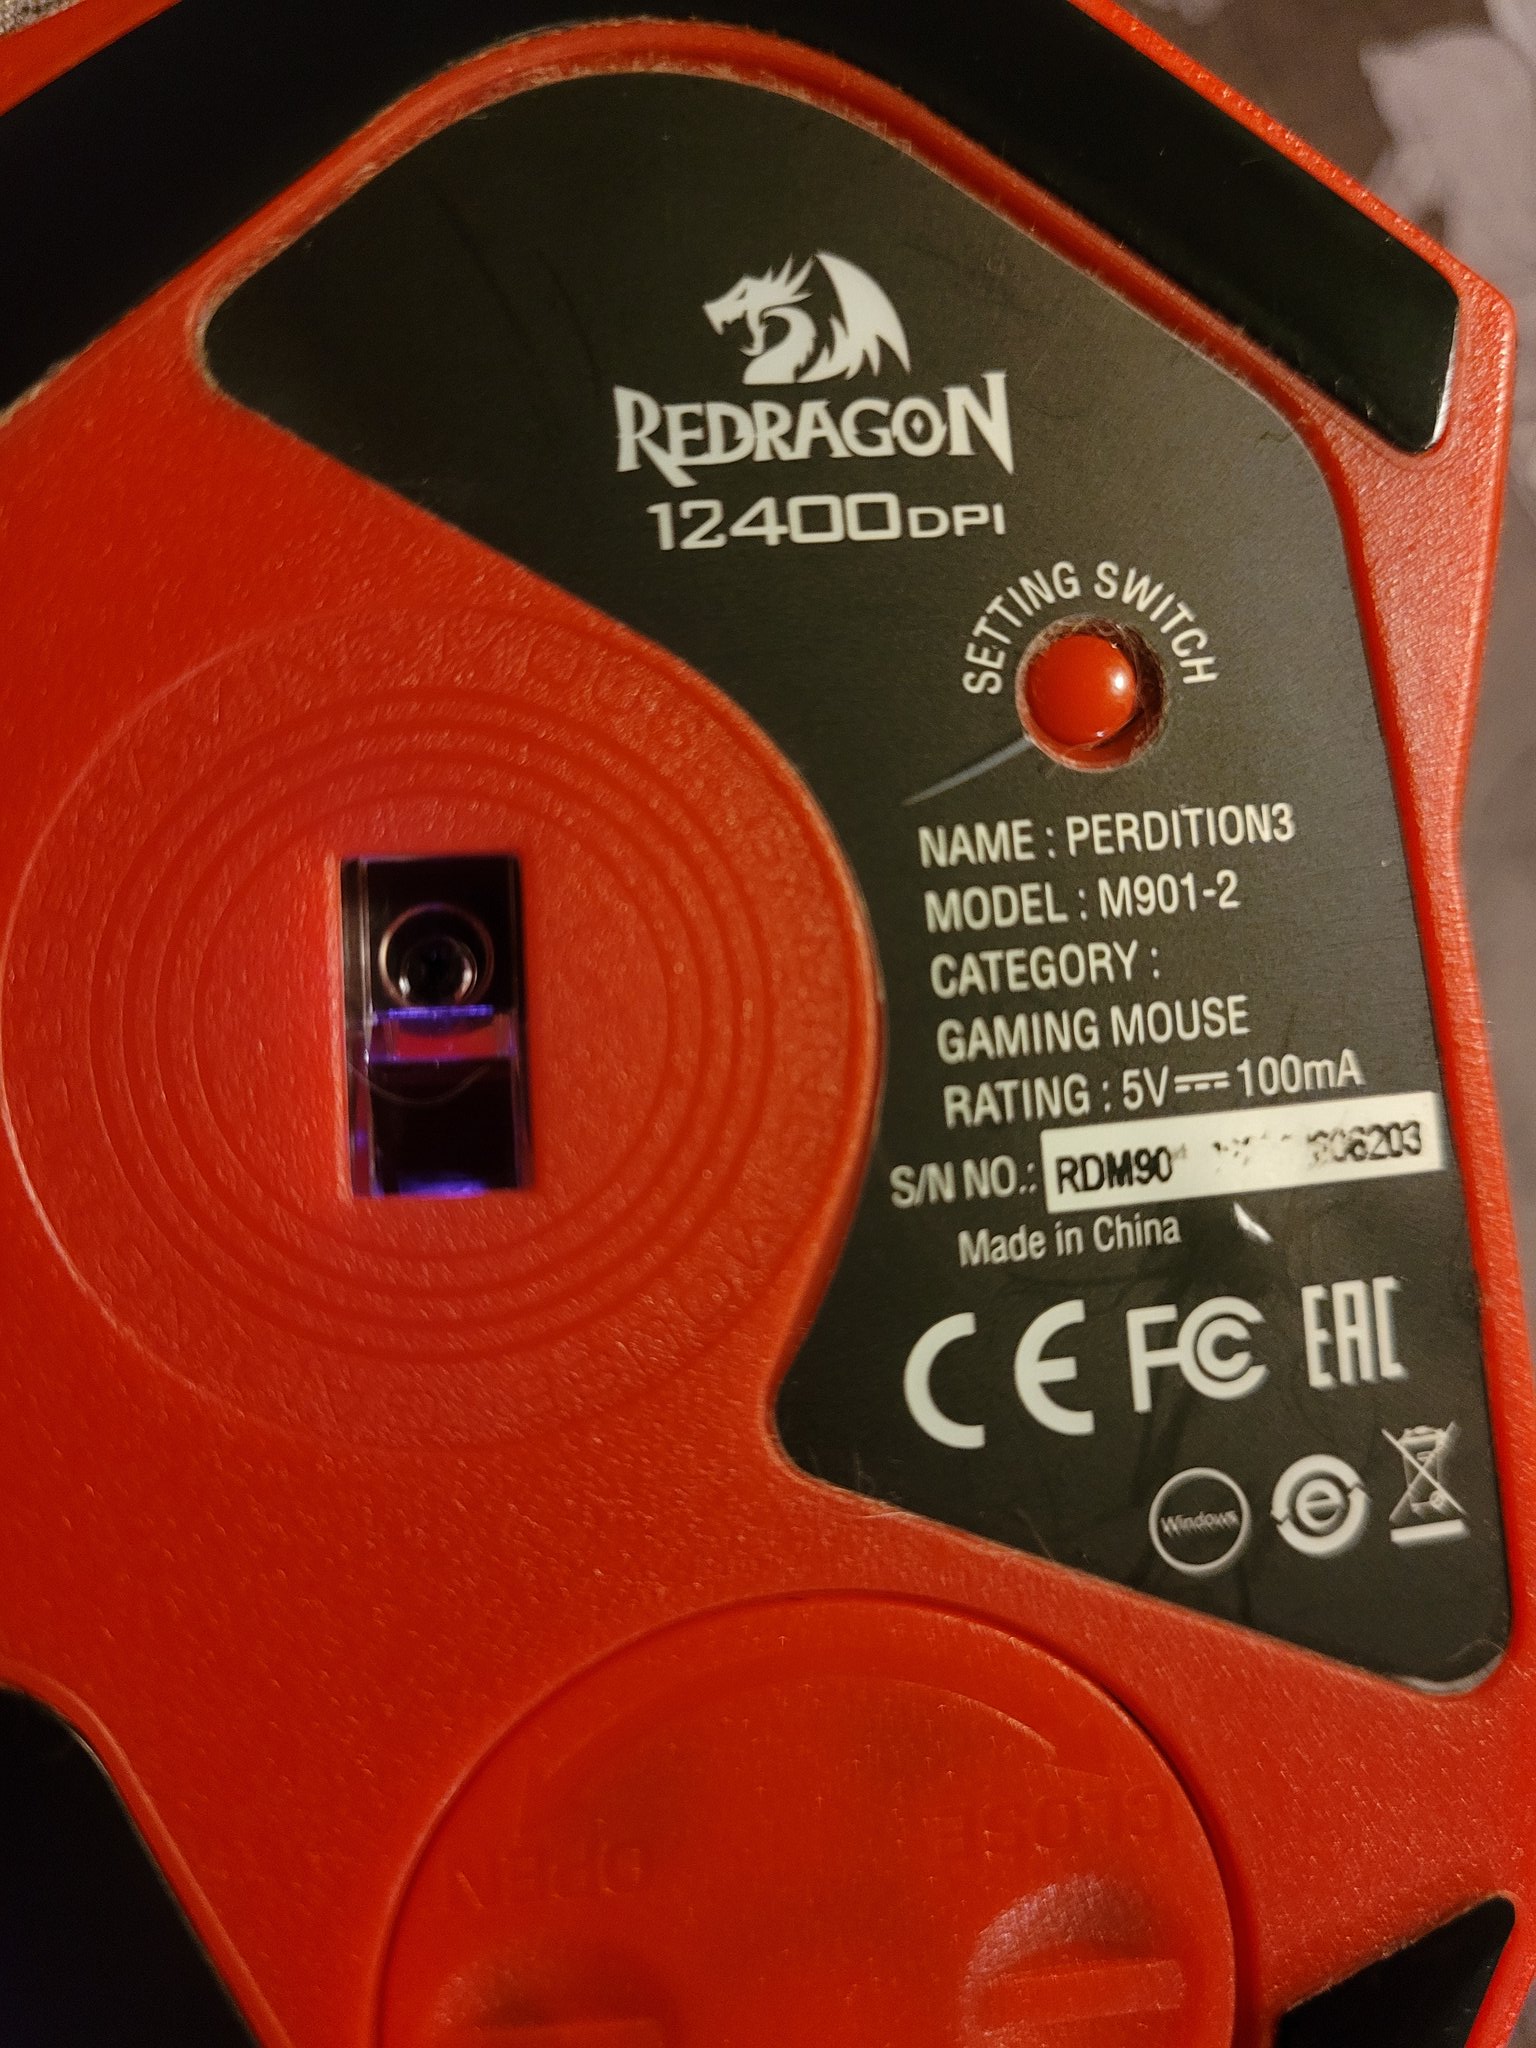 redragon perdition mouse r3wR